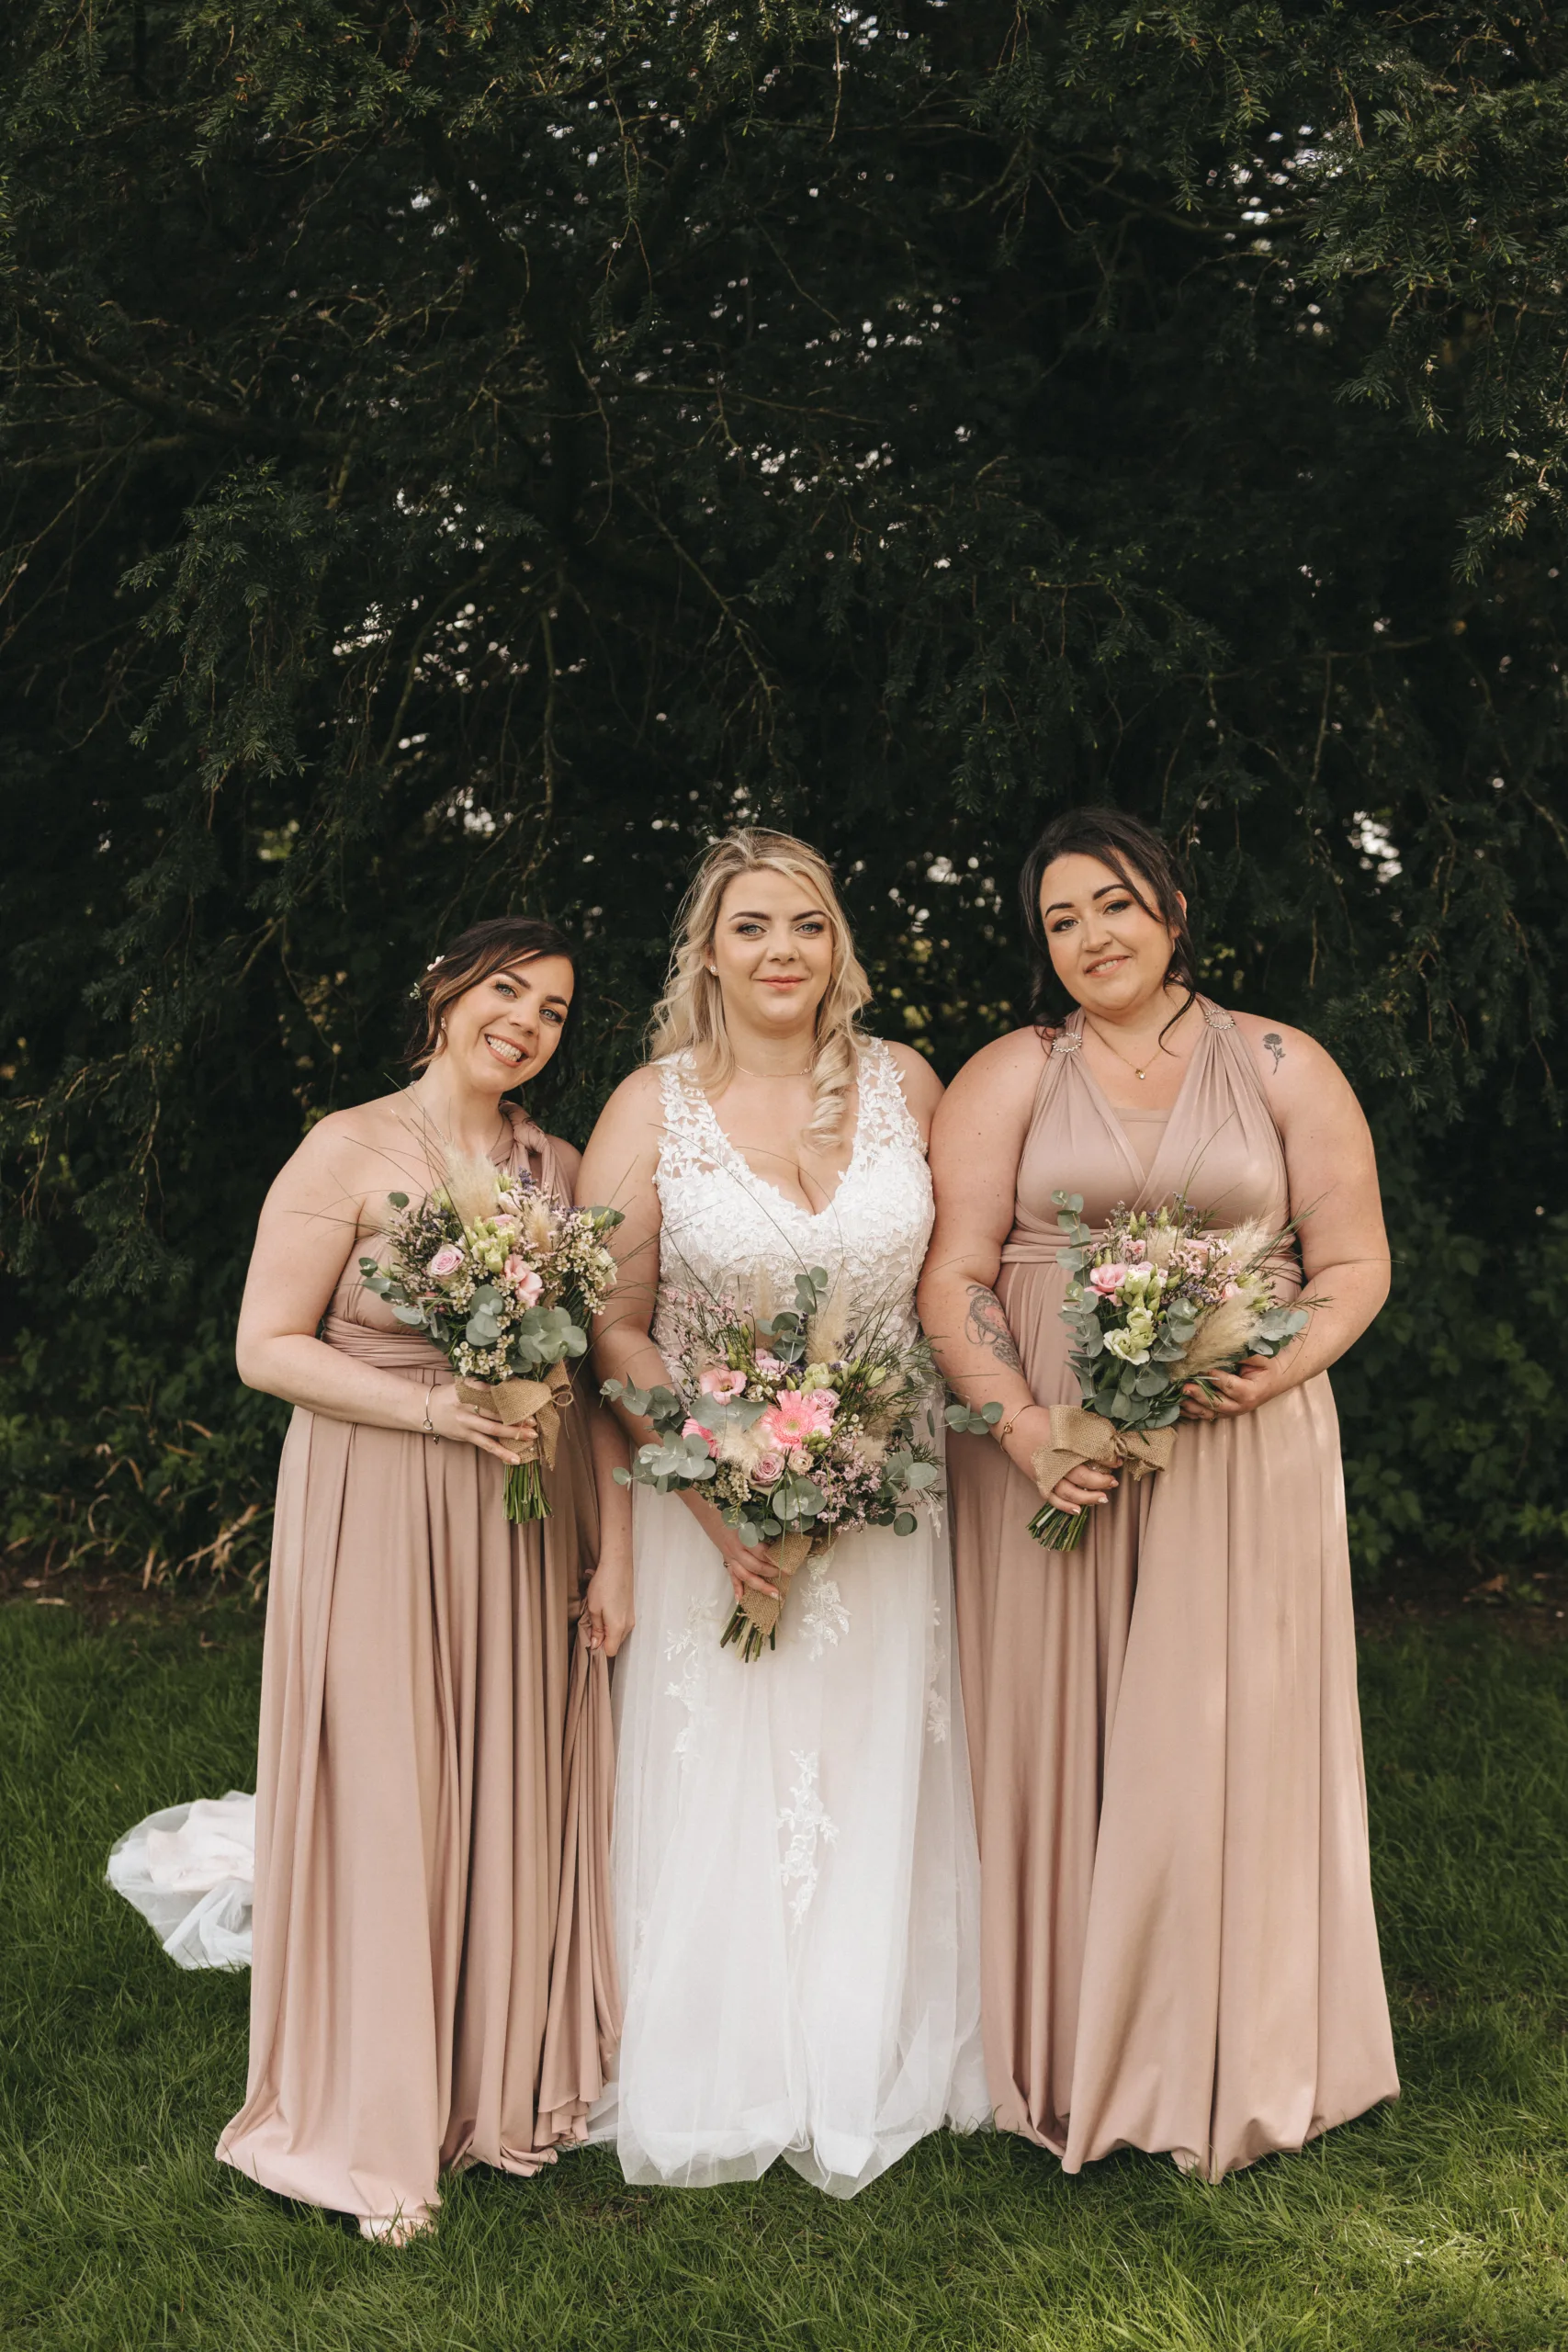 A bride in a white gown stands center among two bridesmaids in blush dresses, all holding bouquets, with a background of lush greenery. The trio smiles joyfully for the camera, capturing the